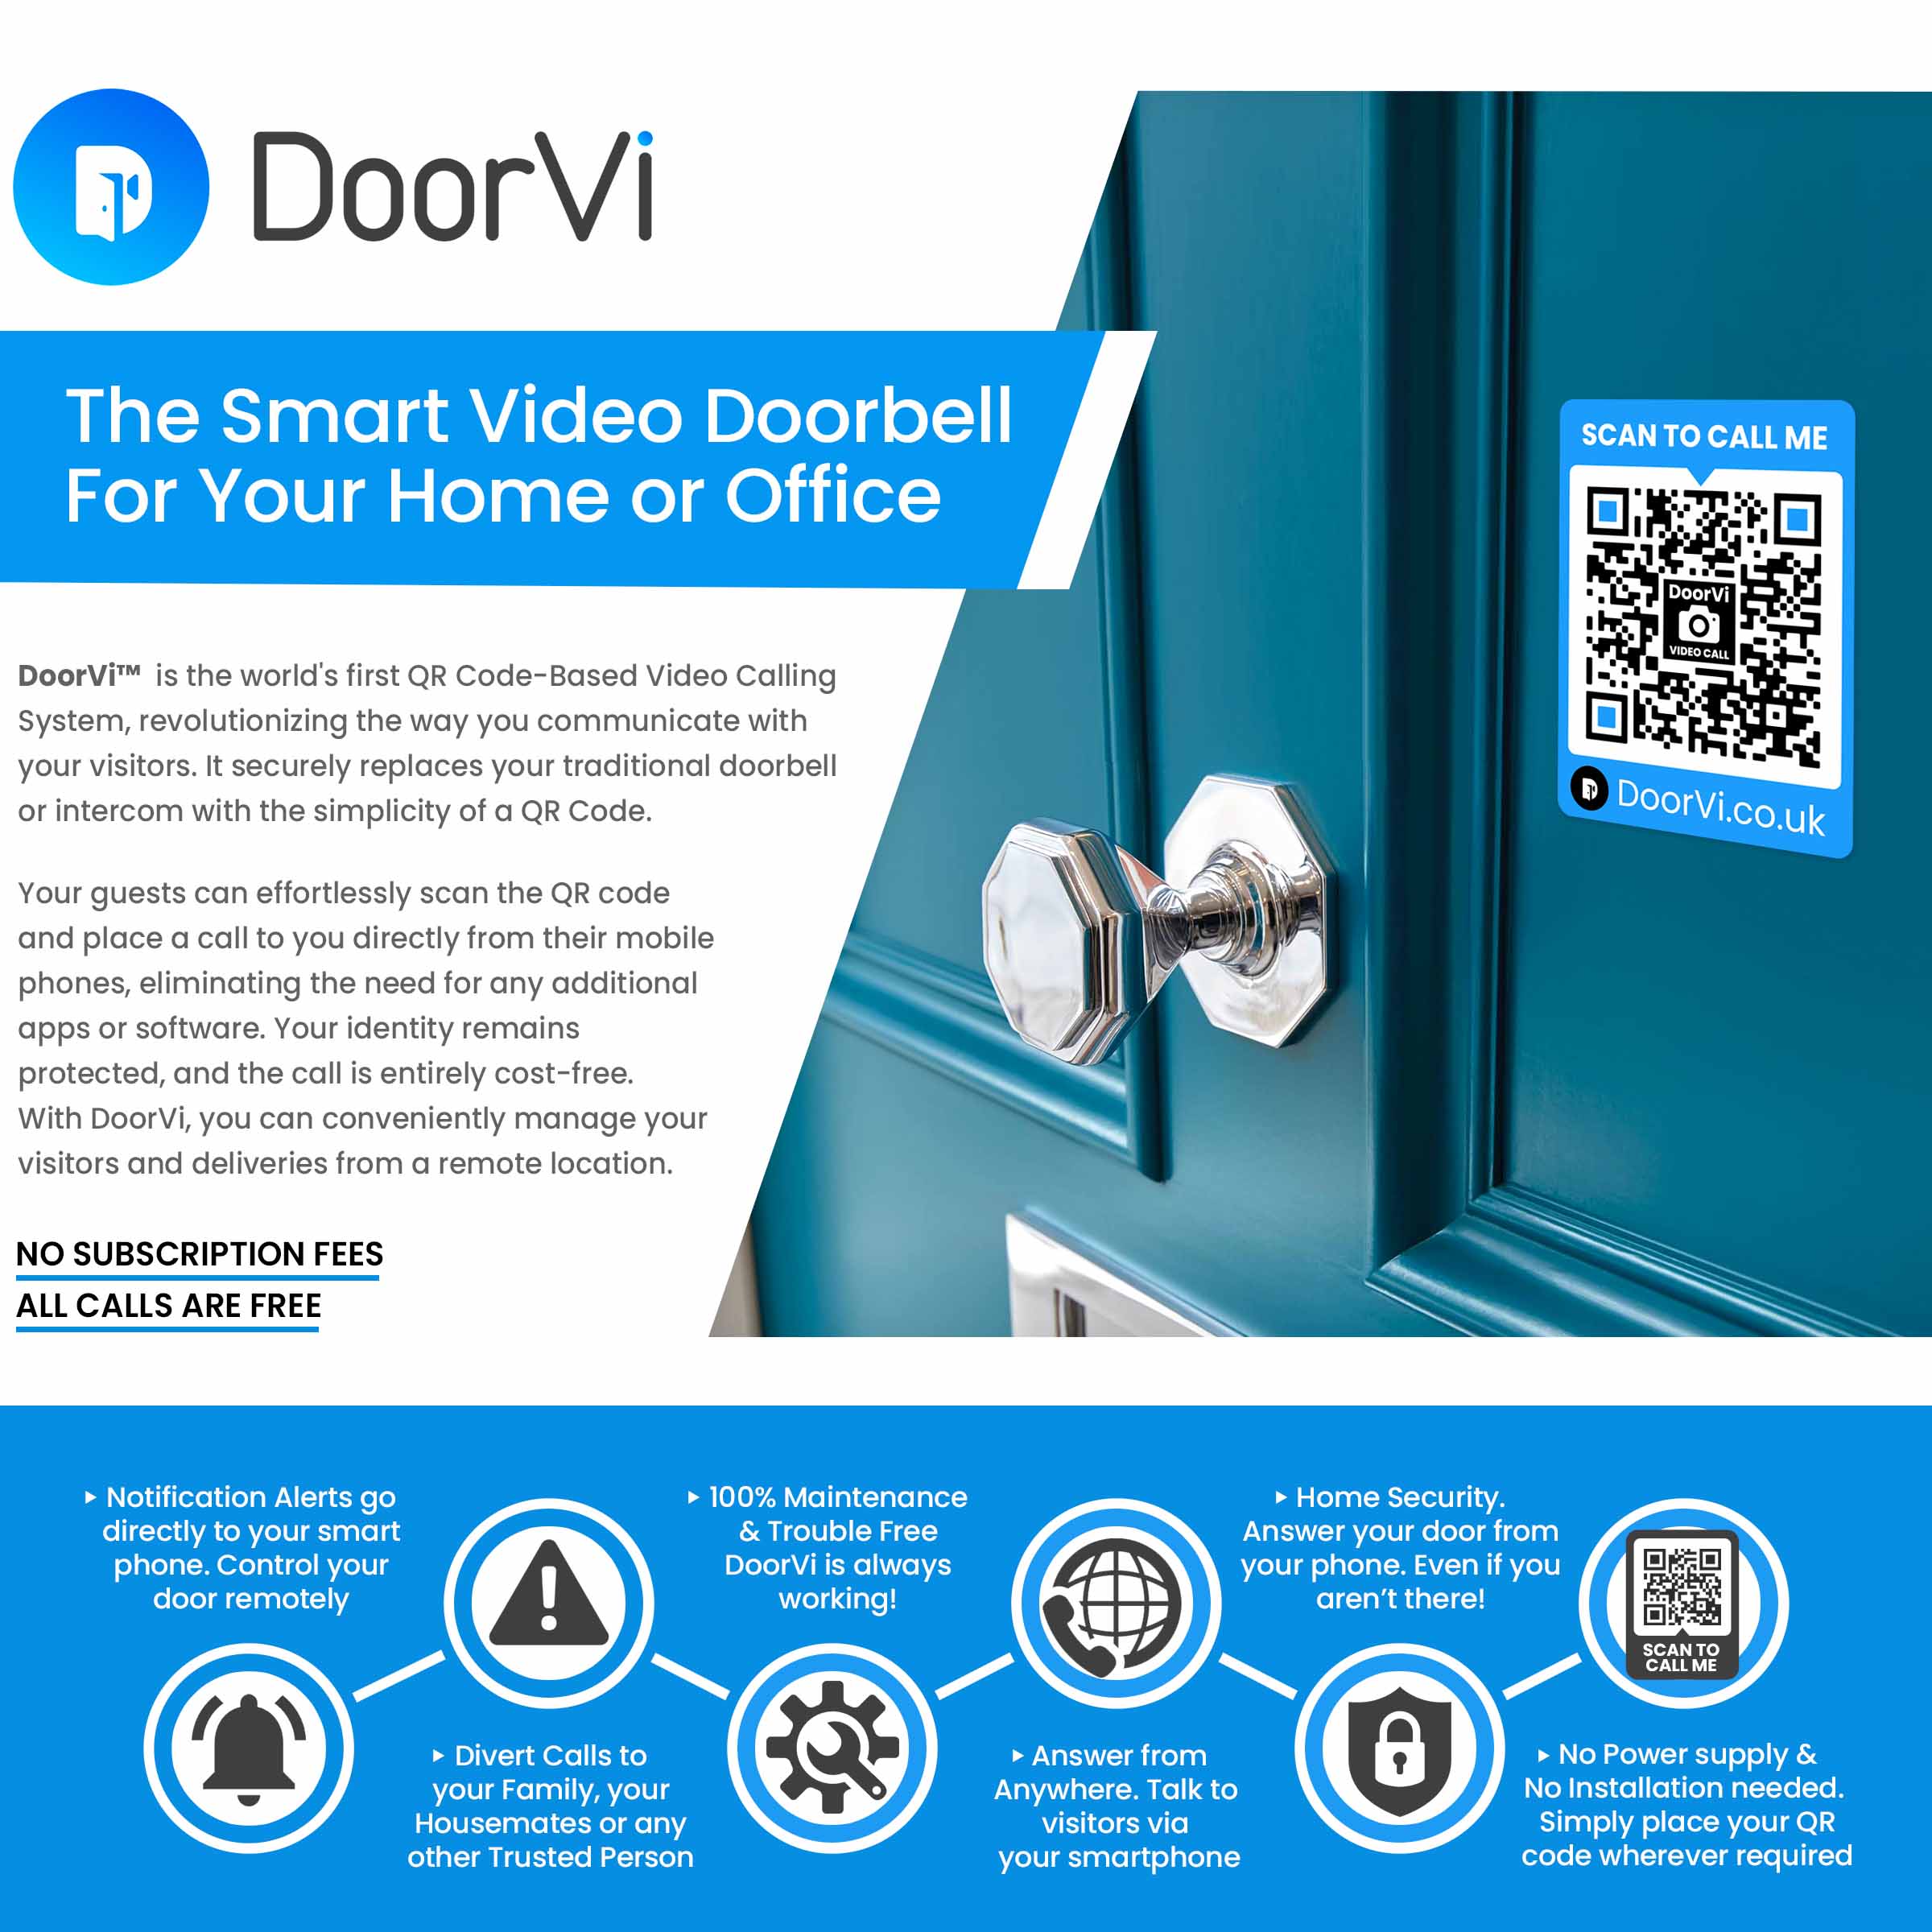 The Smart Video Doorbell For Your Home or Office